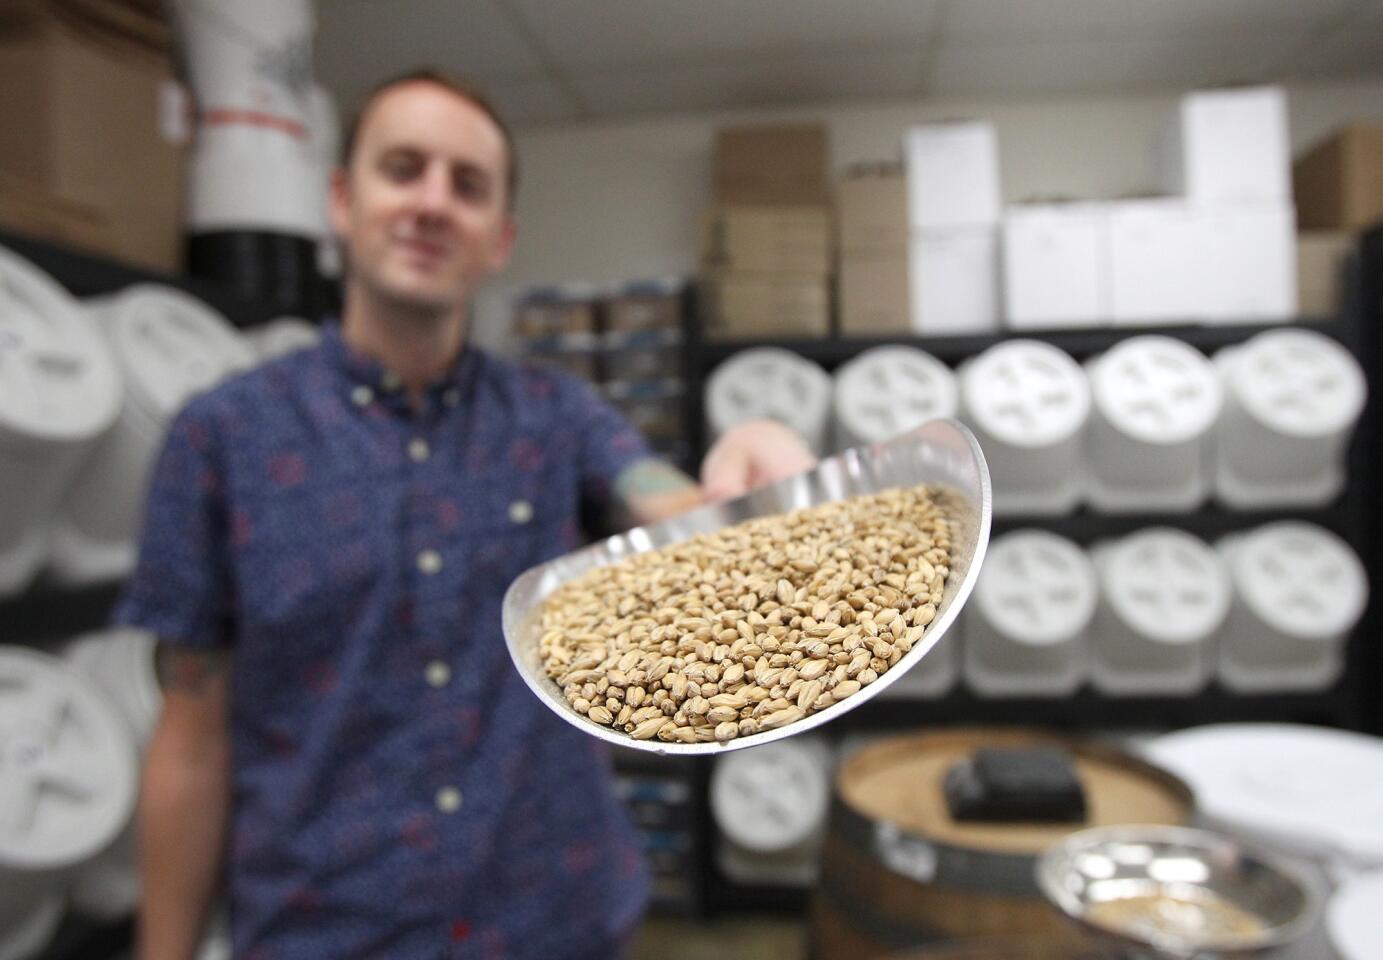 Scott Windsor pours barley onto a scale at his Windsor Home Brew Supply in Costa Mesa. Windsor is a former indie rock musician and has been brewing for 11 years.